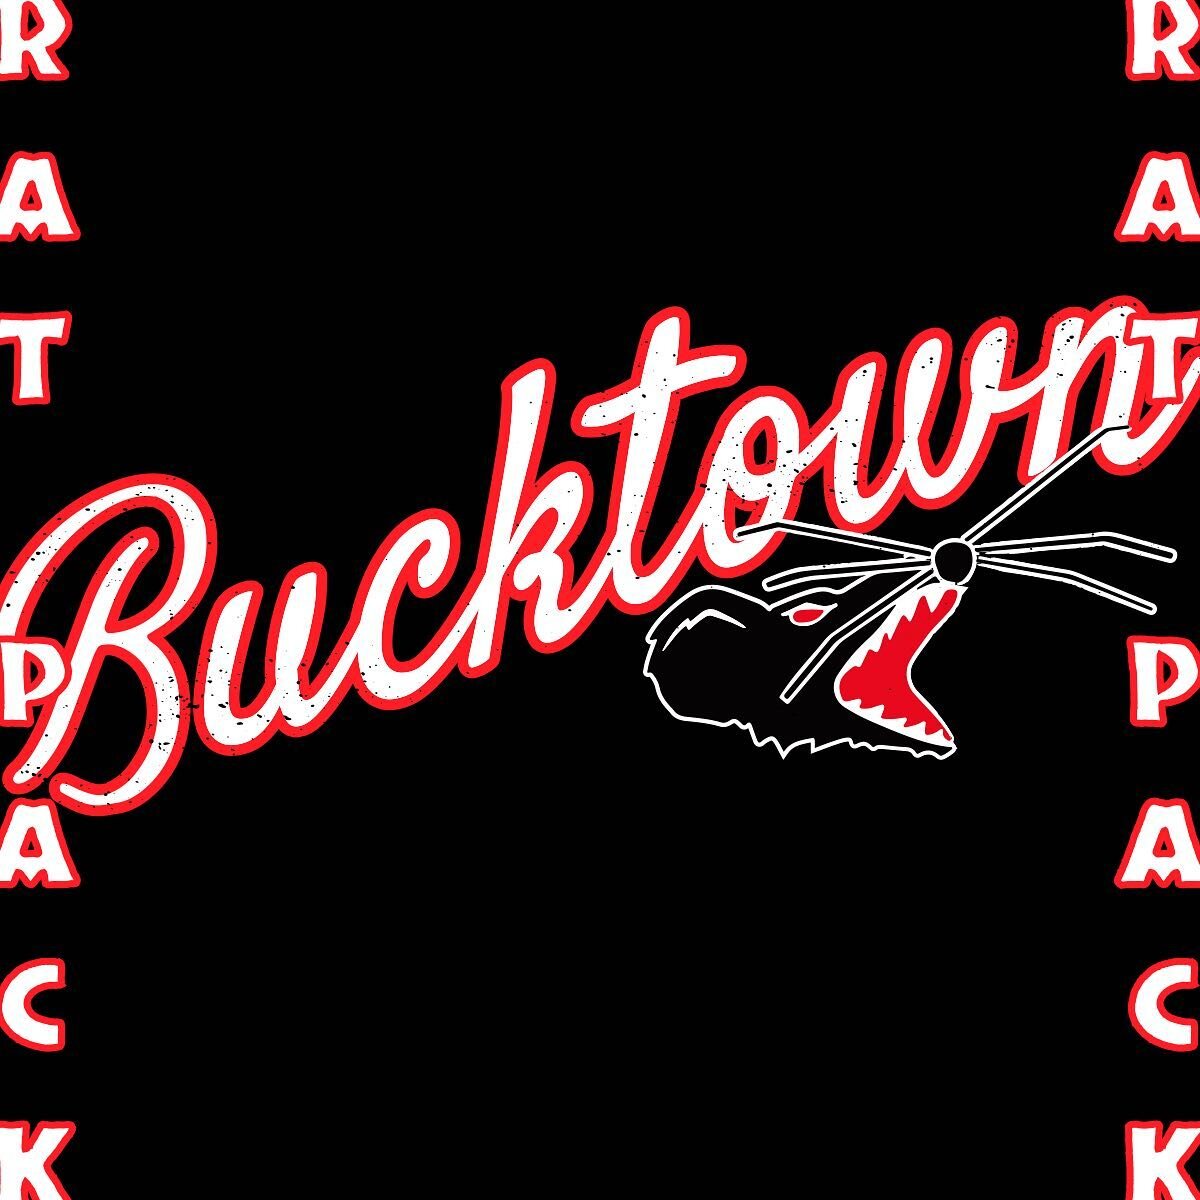 Bucktown Rat Pack gear in the shop as our latest home team now what do you guys want to see next?